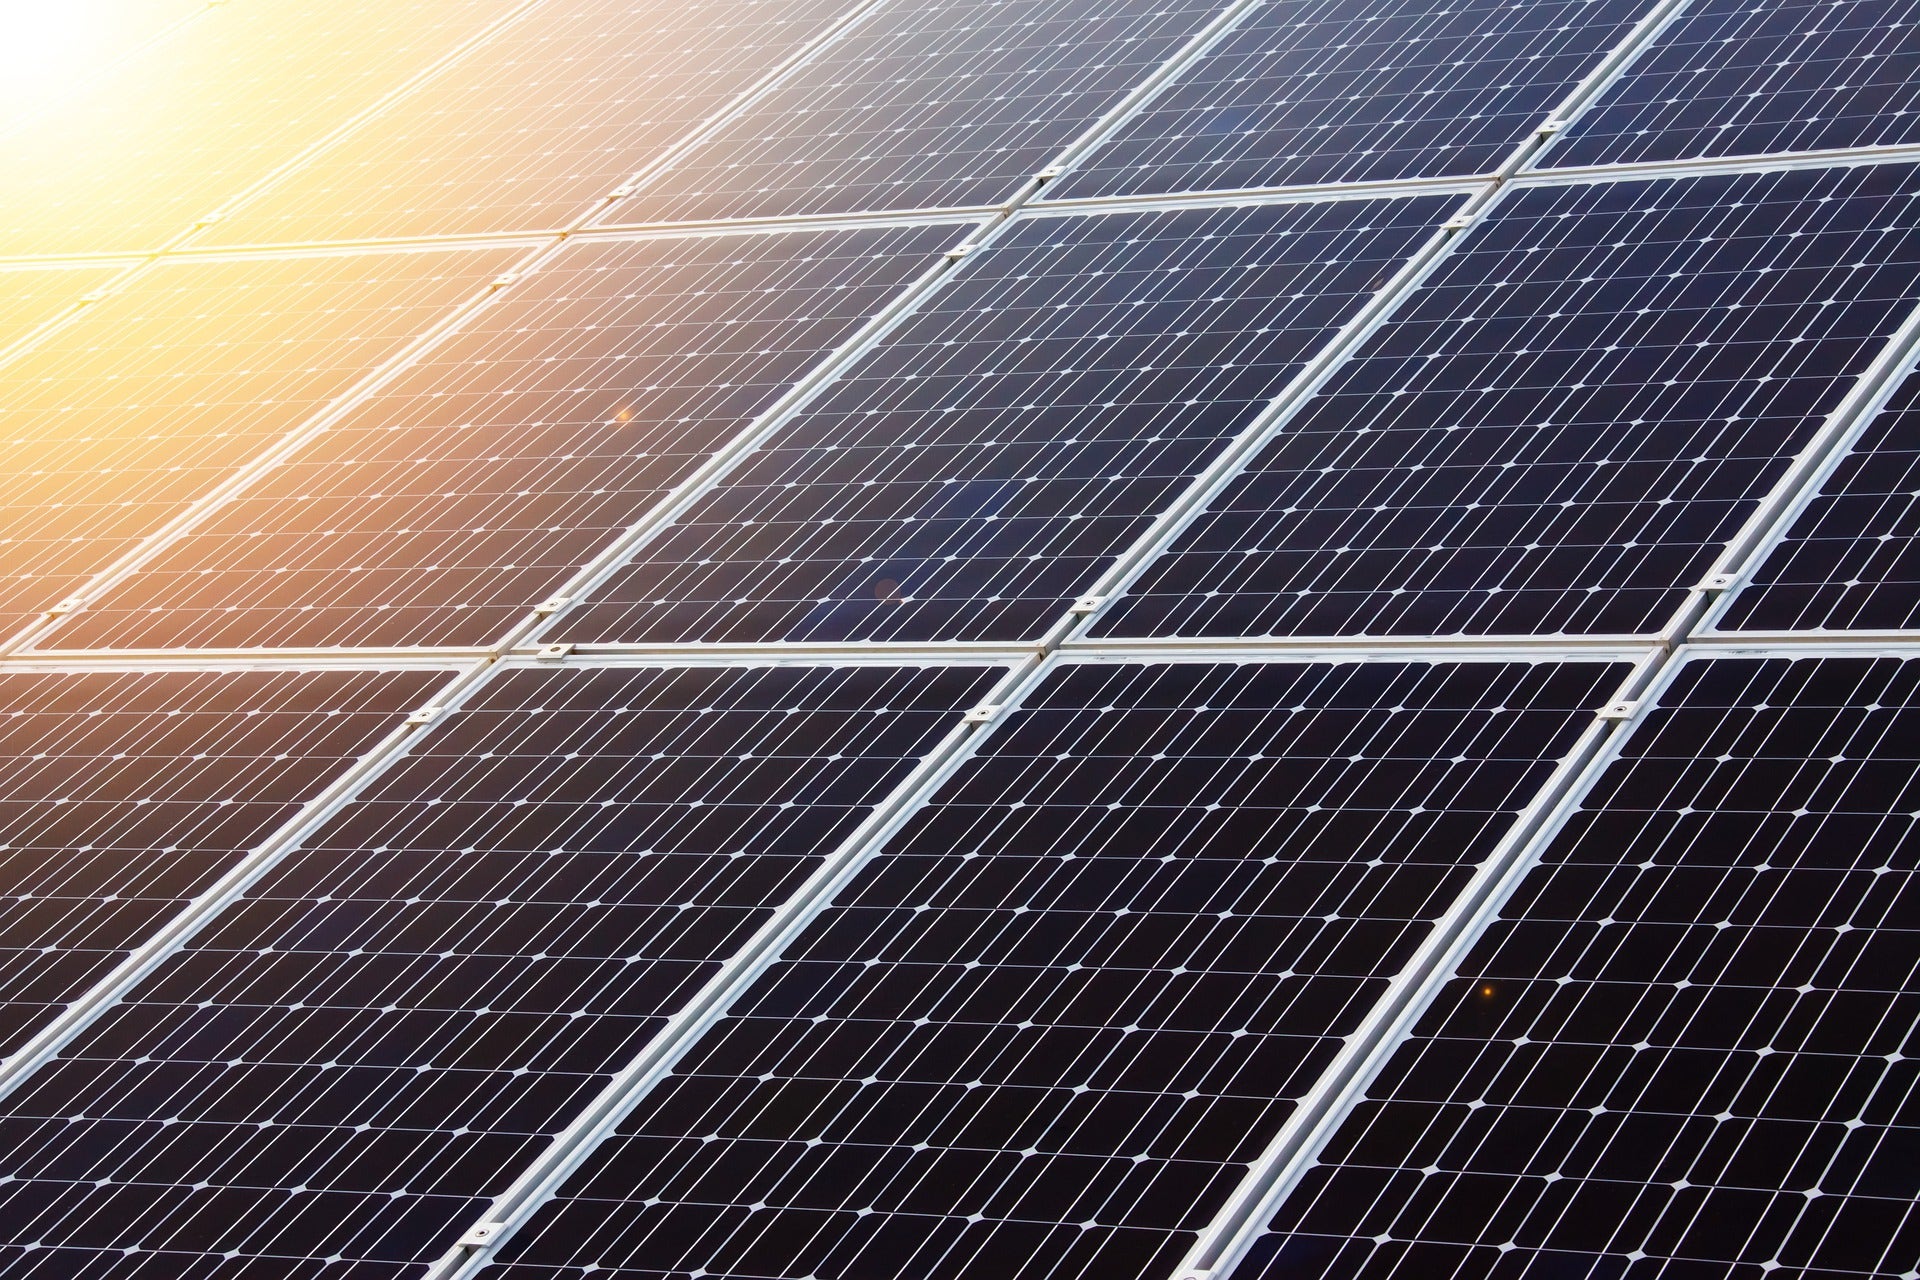 Why Sunrun, First Solar And Array Technologies Shares Are Surging Today